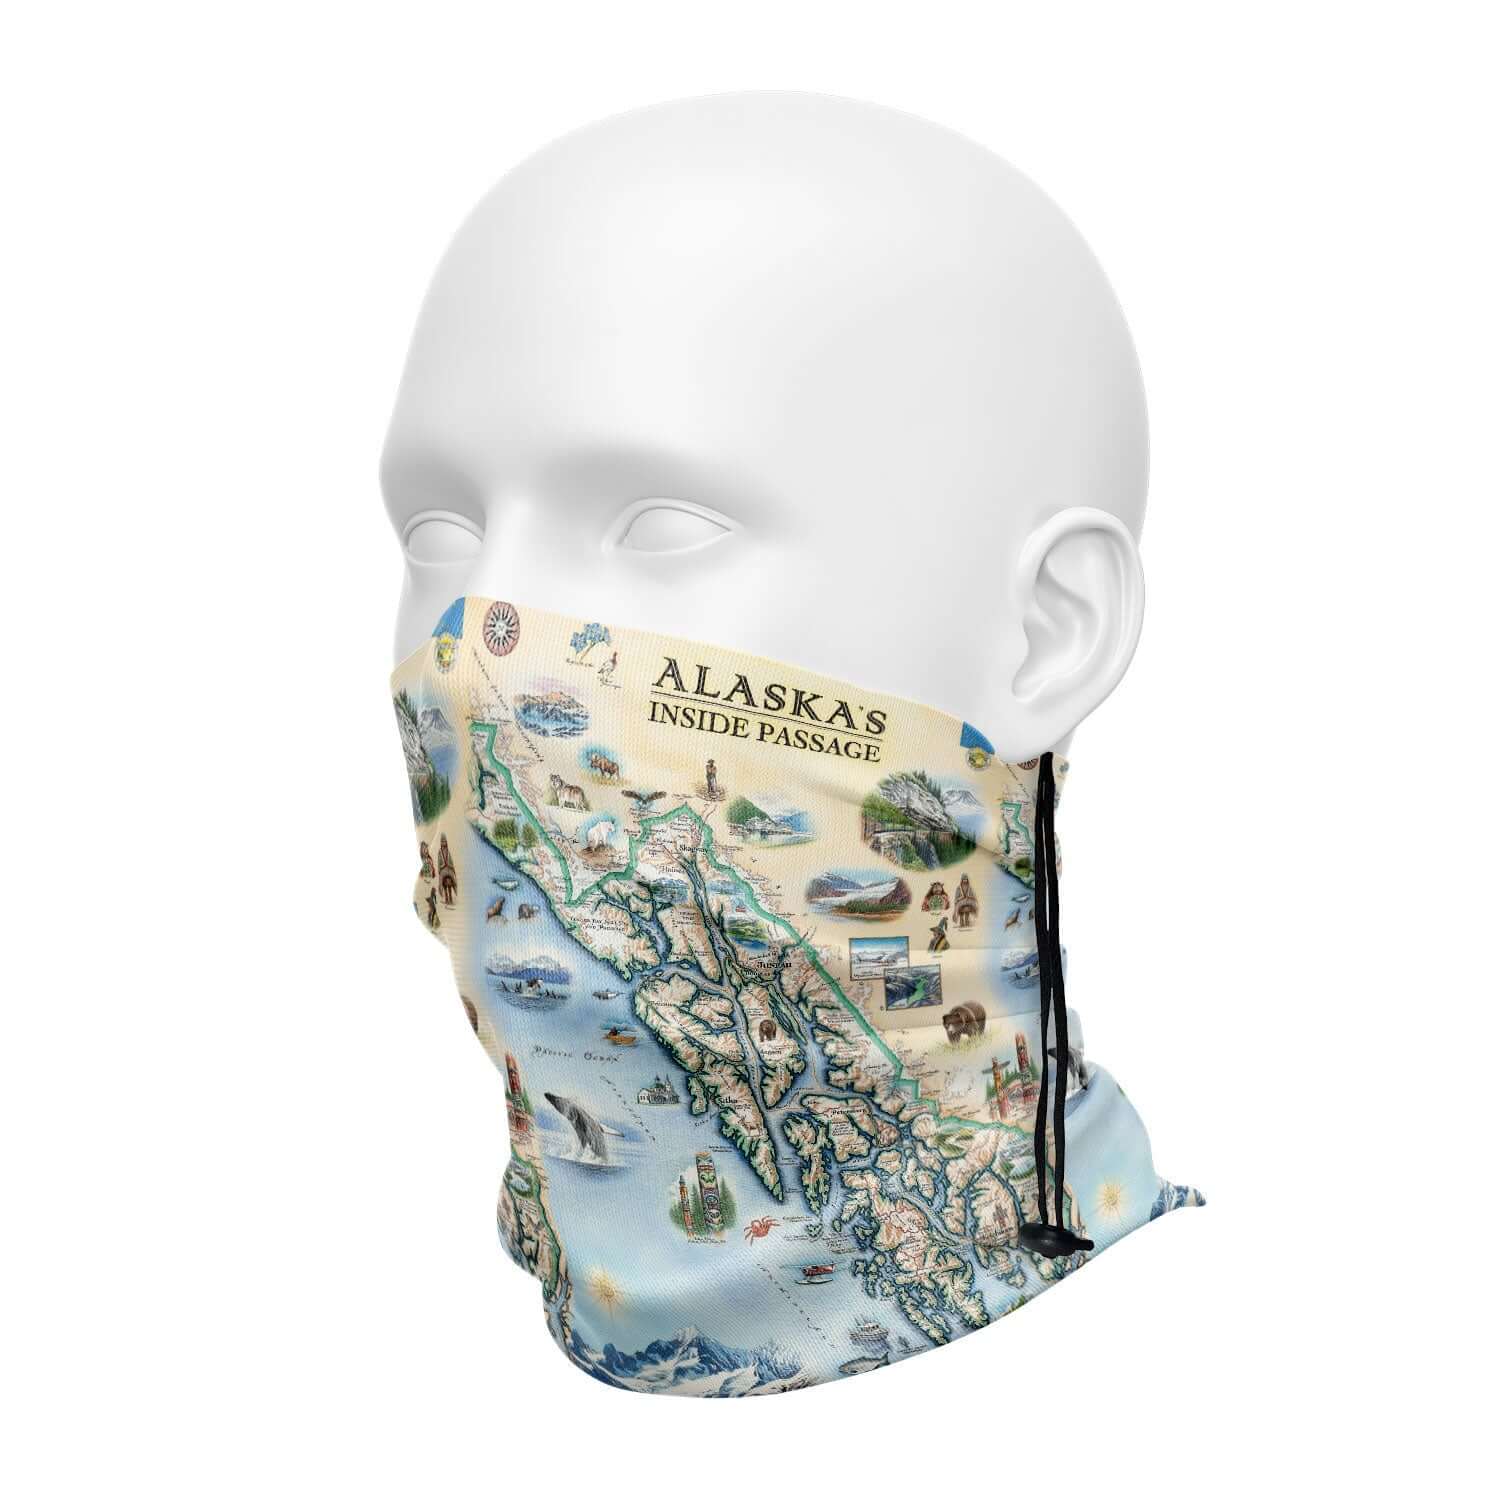 Alaska's Inside Passage Neck Gaiters in earth tone colors - featuring bears, whale, mountain goat & sheep.